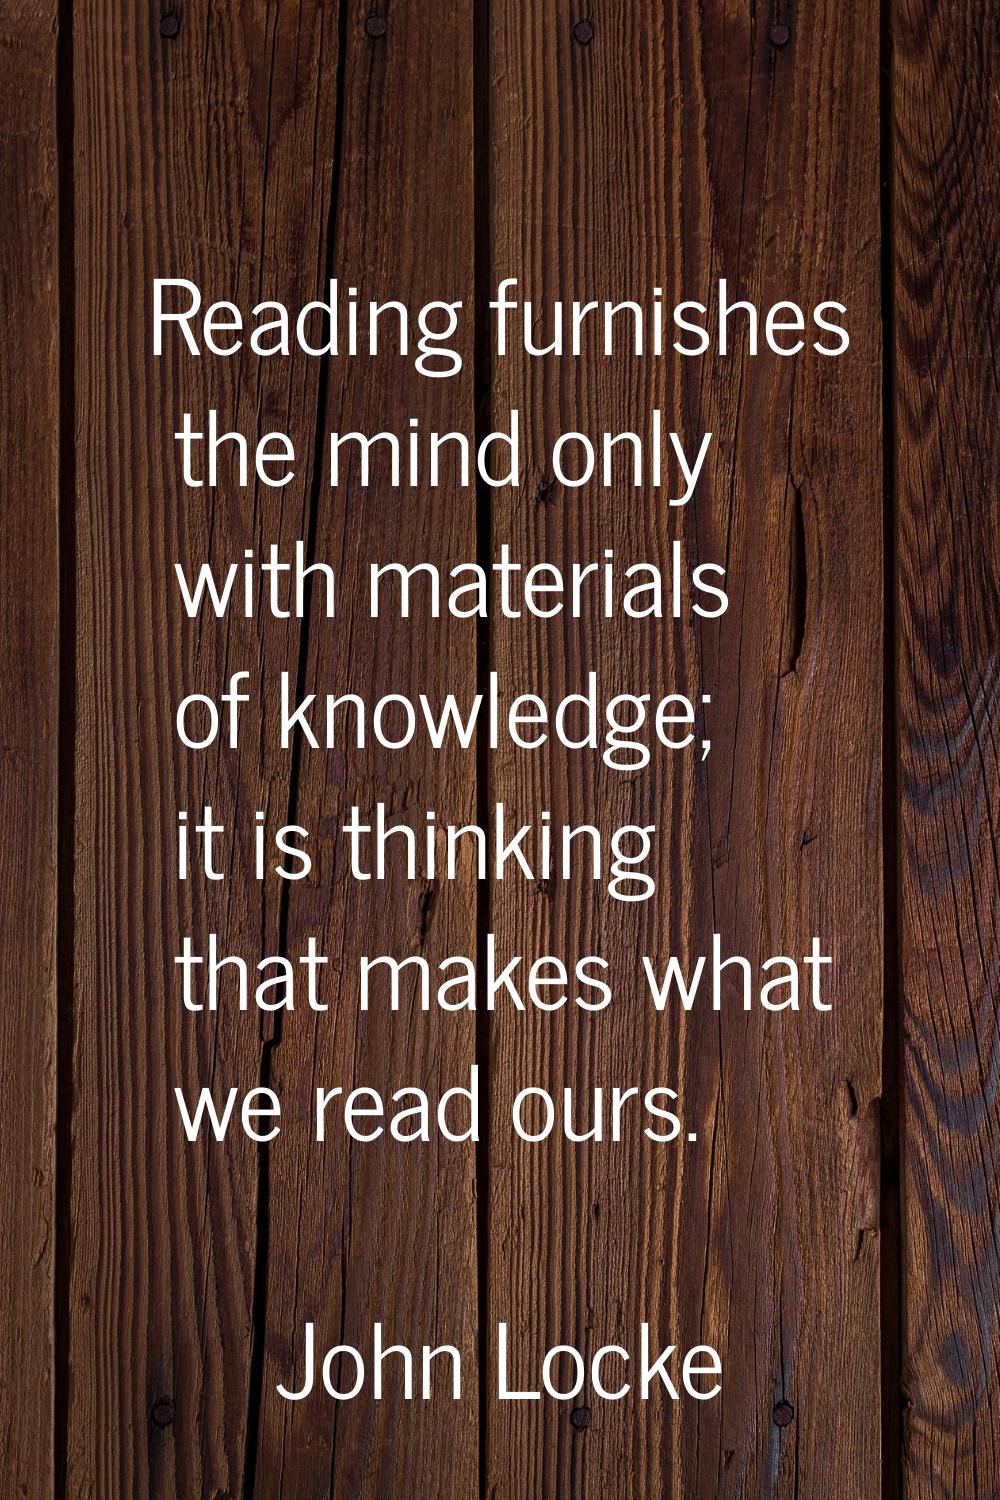 Reading furnishes the mind only with materials of knowledge; it is thinking that makes what we read